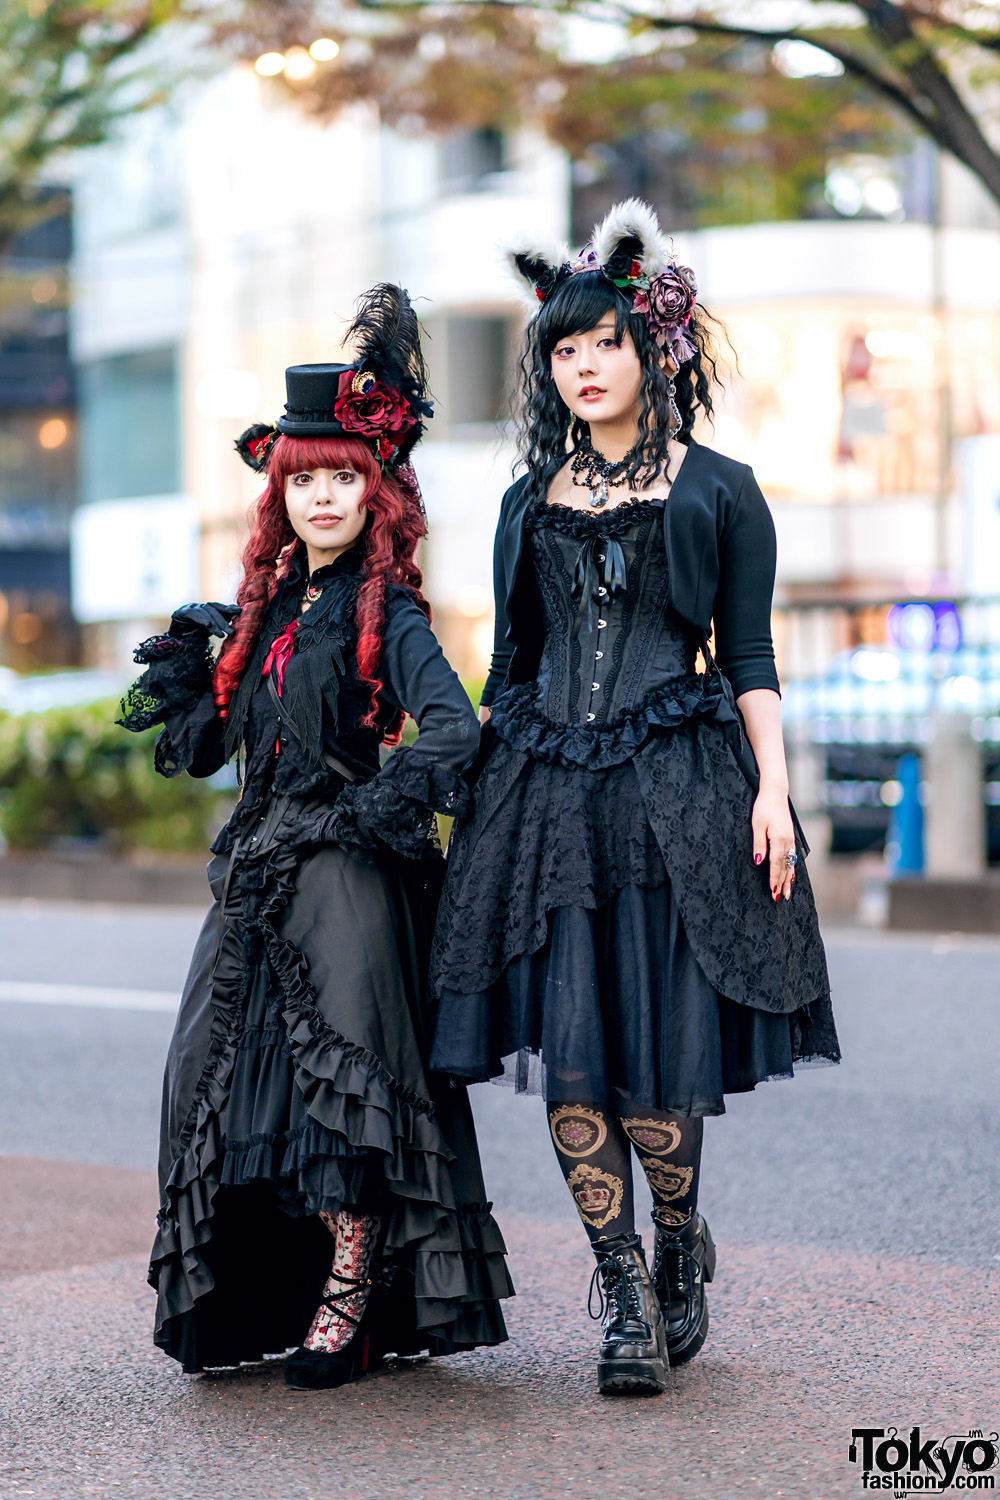 Gothic Lolita Street Styles w/ Furry Ears, MR Corset, Innocent World Ruffle Skirts, Baby The Stars Shine Bright, Mary West Necklaces & Vivienne Westwood Bag